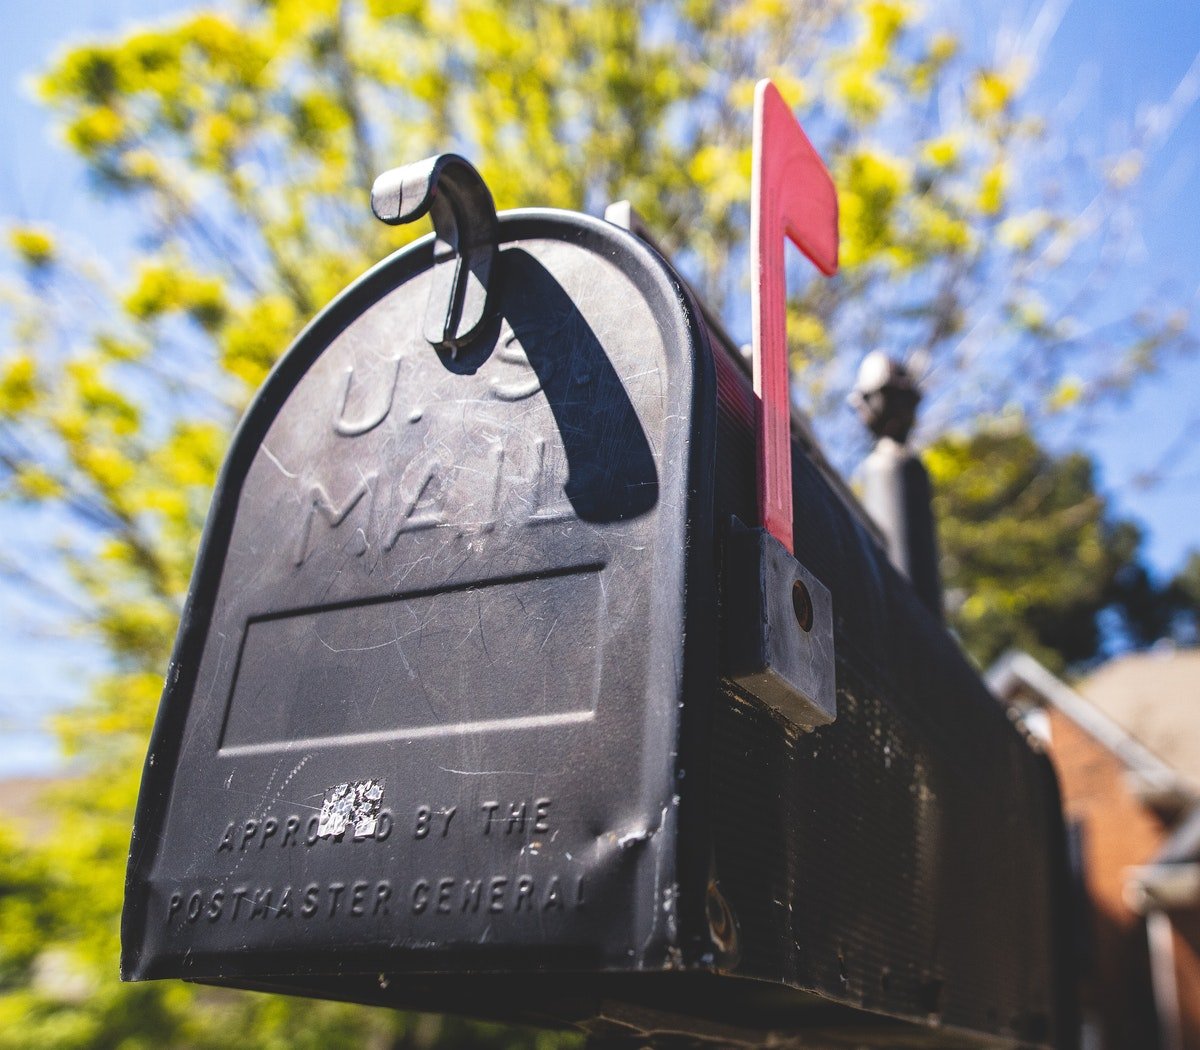 5 Direct Marketing Tips for Your Campaign